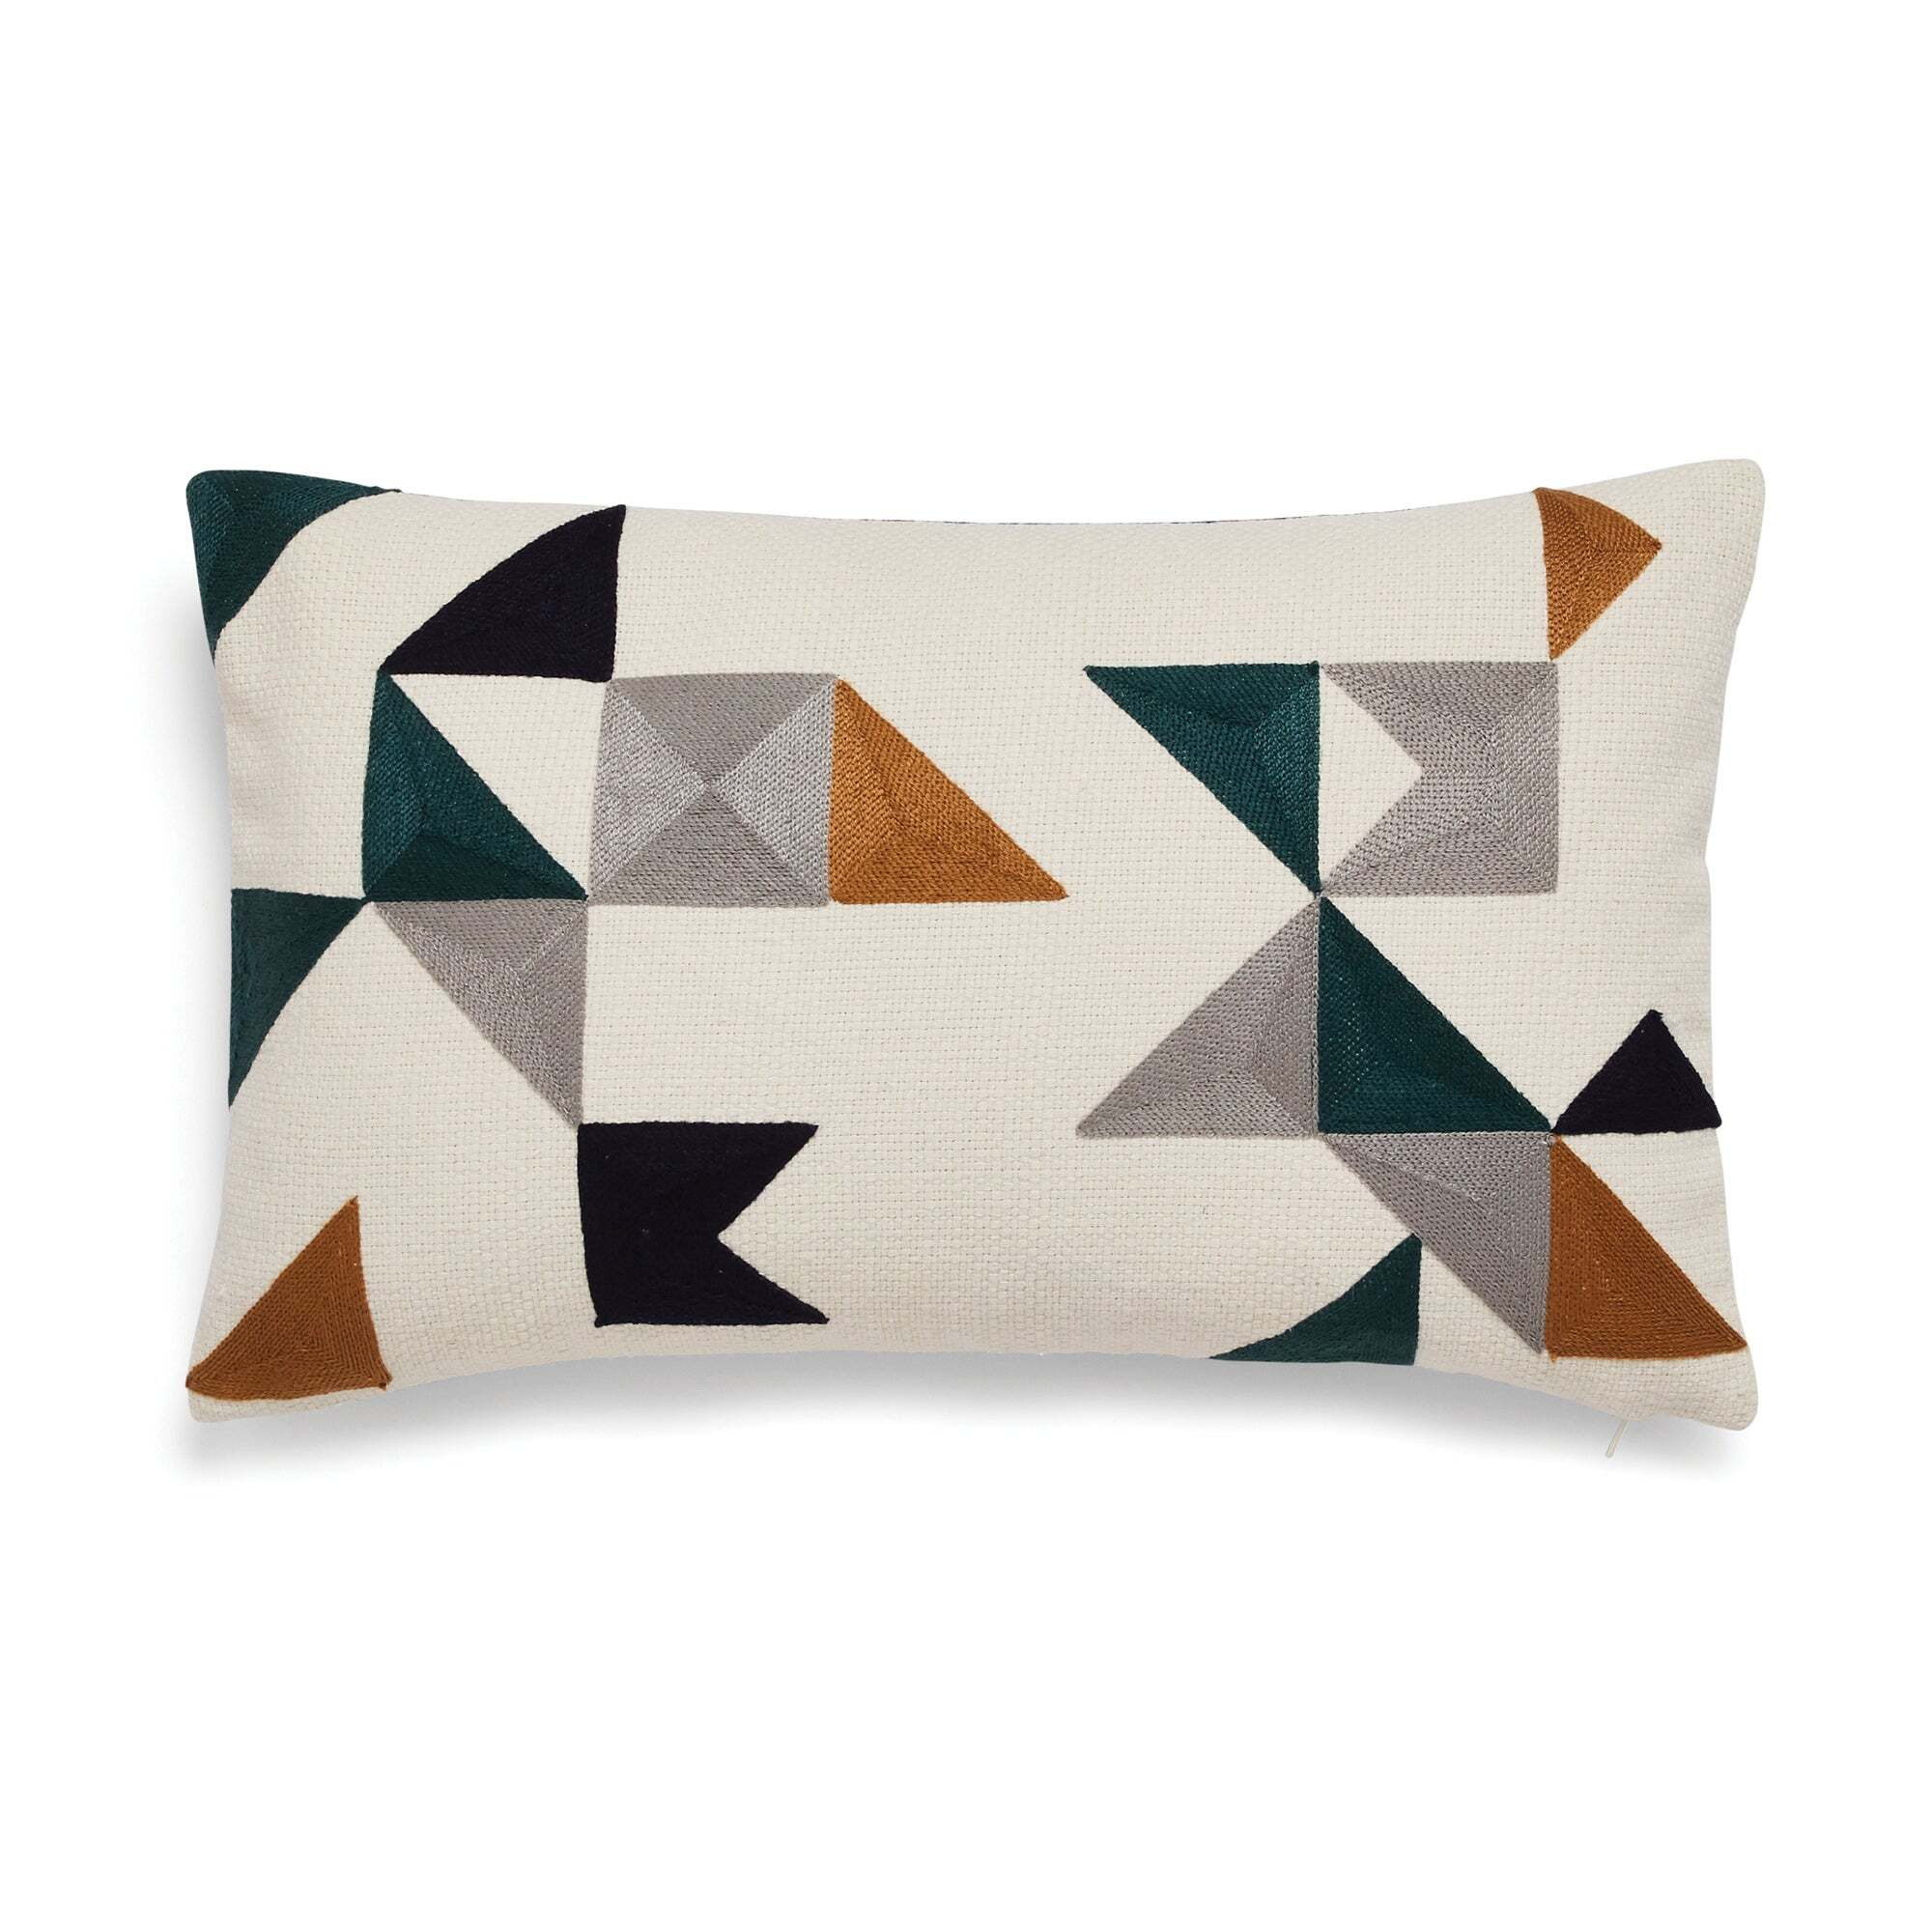 Elements Triangle Crewel Cushion Cream, Teal Blue, Grey and Ochre Yellow